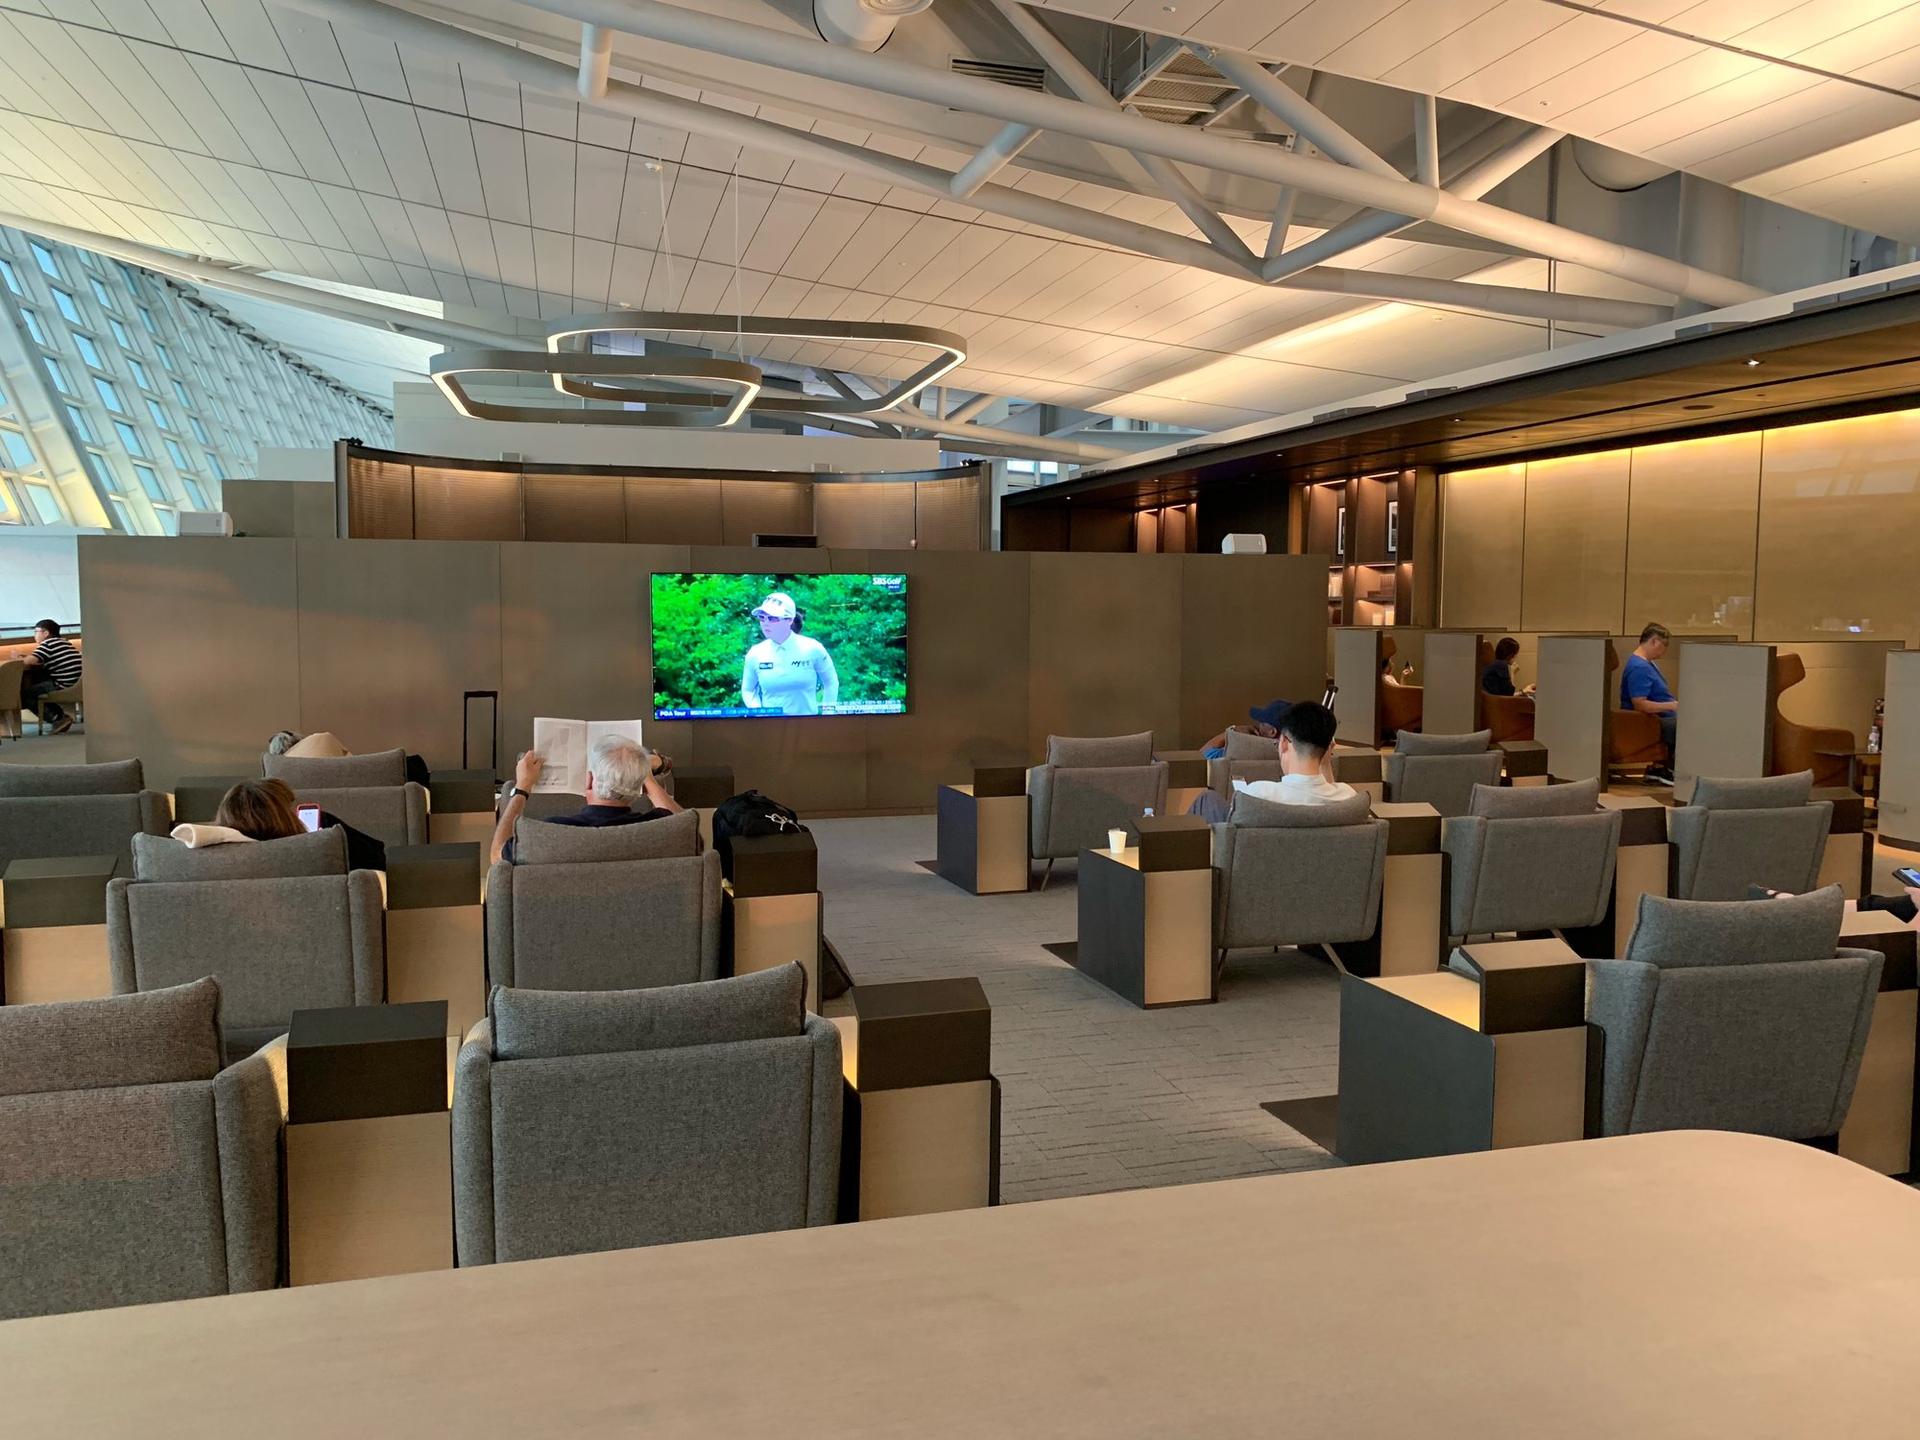 Asiana Airlines Business Class Lounge (East) image 33 of 59